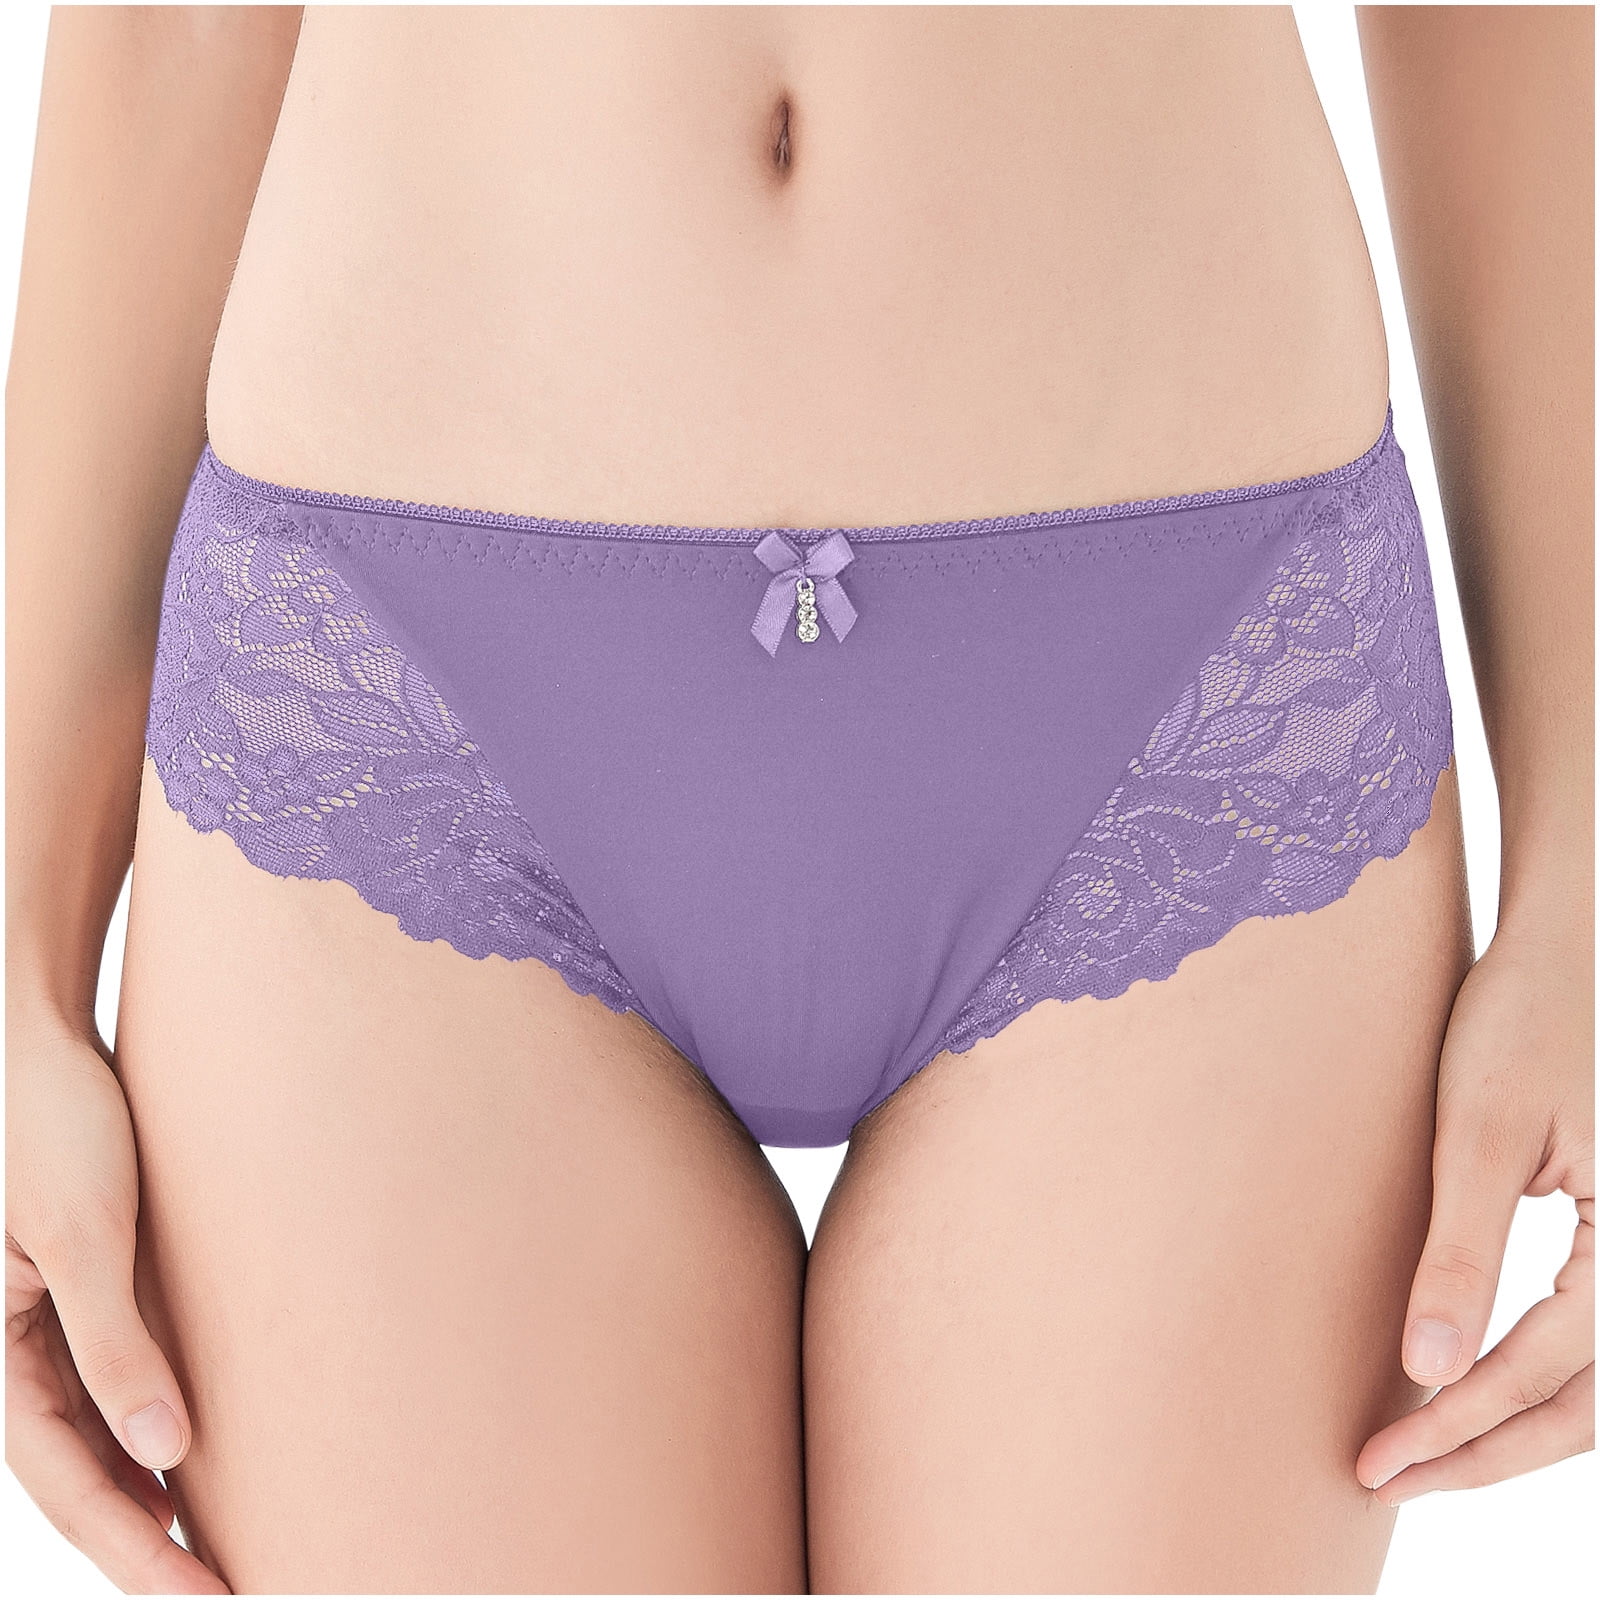 Efsteb Lace Panties for Women Ropa Interior Mujer Breathable